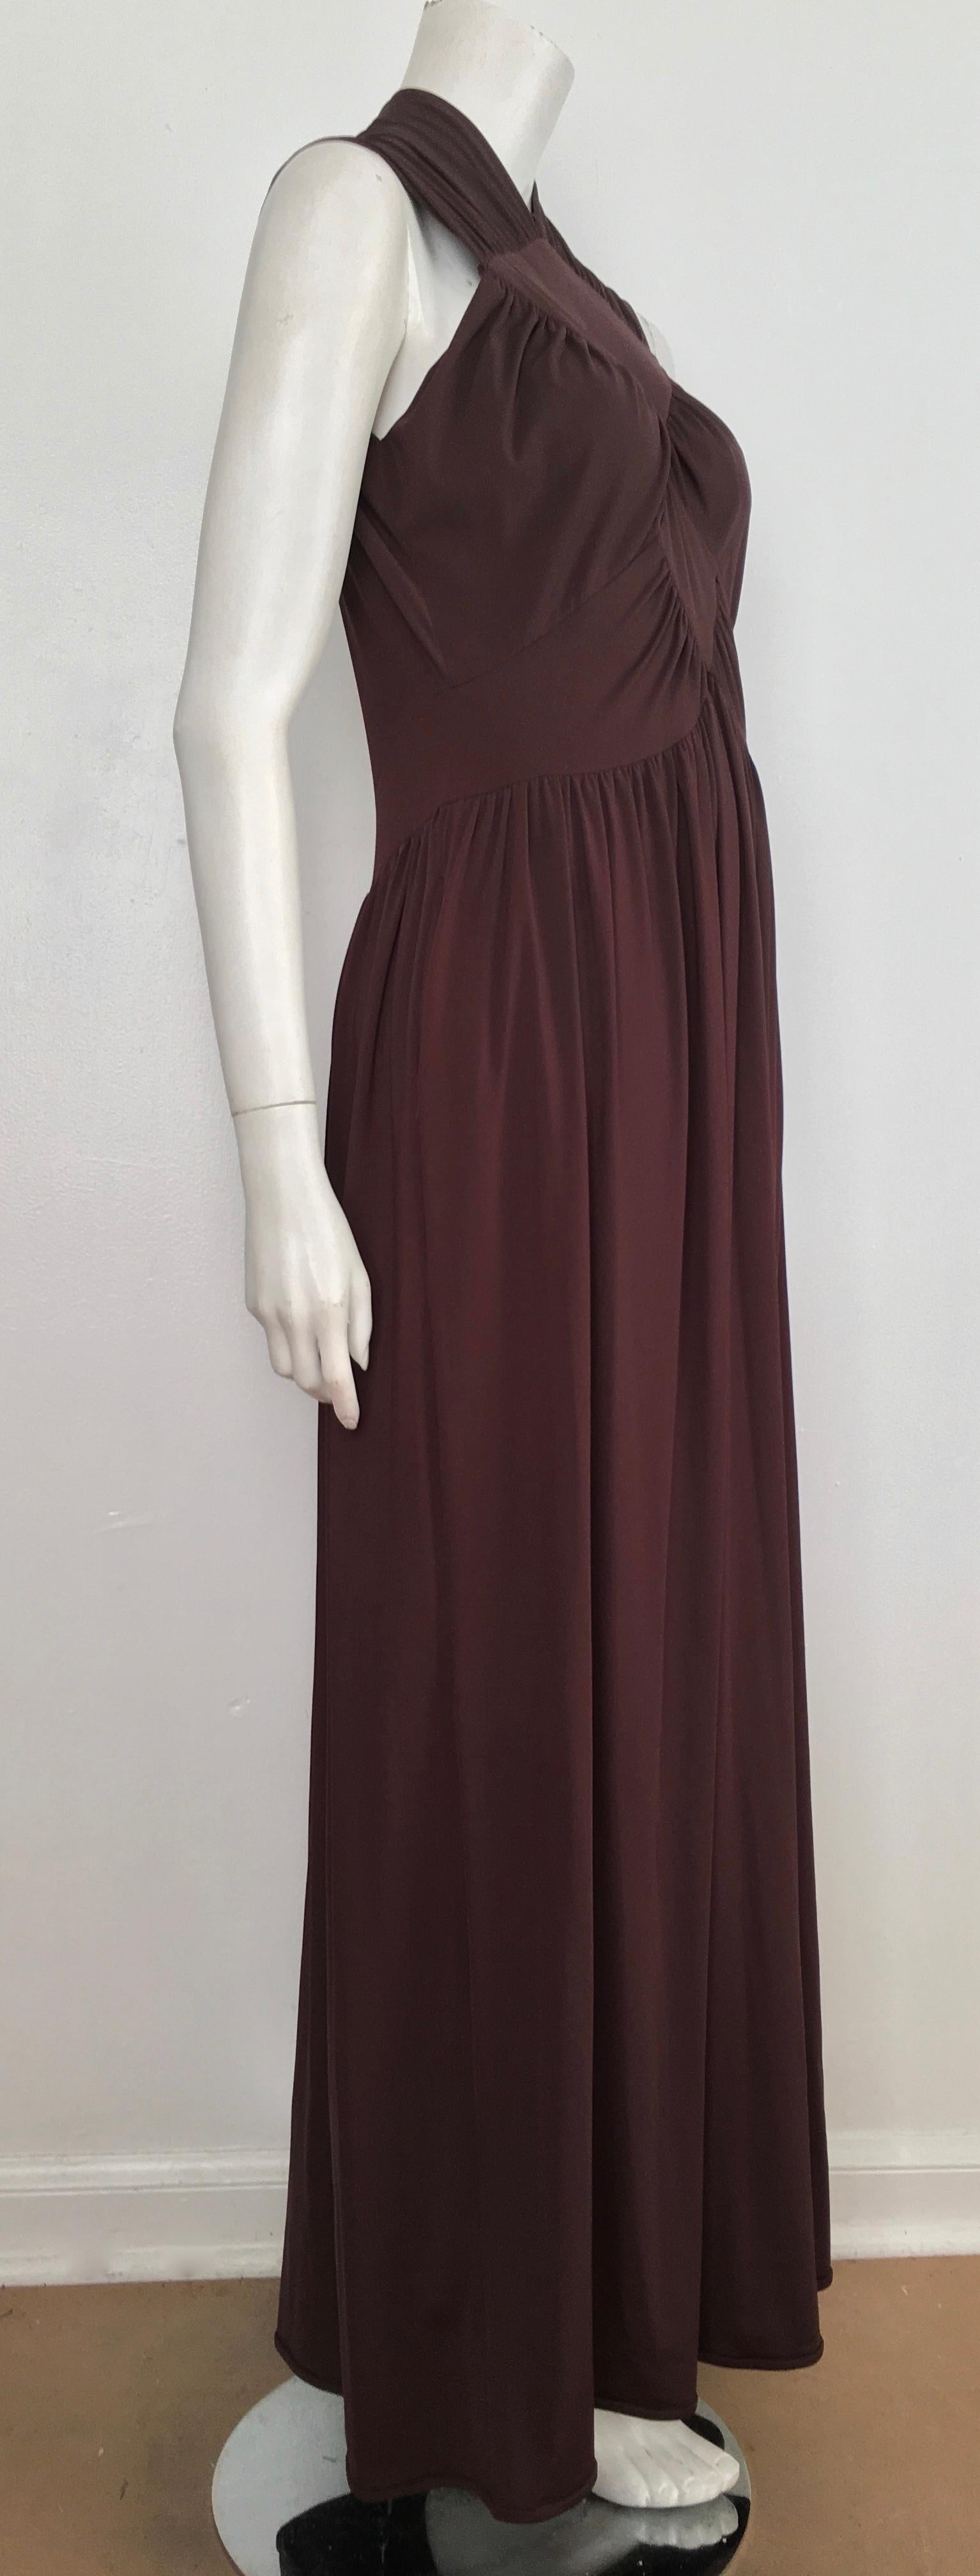 Robert David Morton 1970s Brown Jersey Maxi Dress with pockets Size 8. For Sale 5